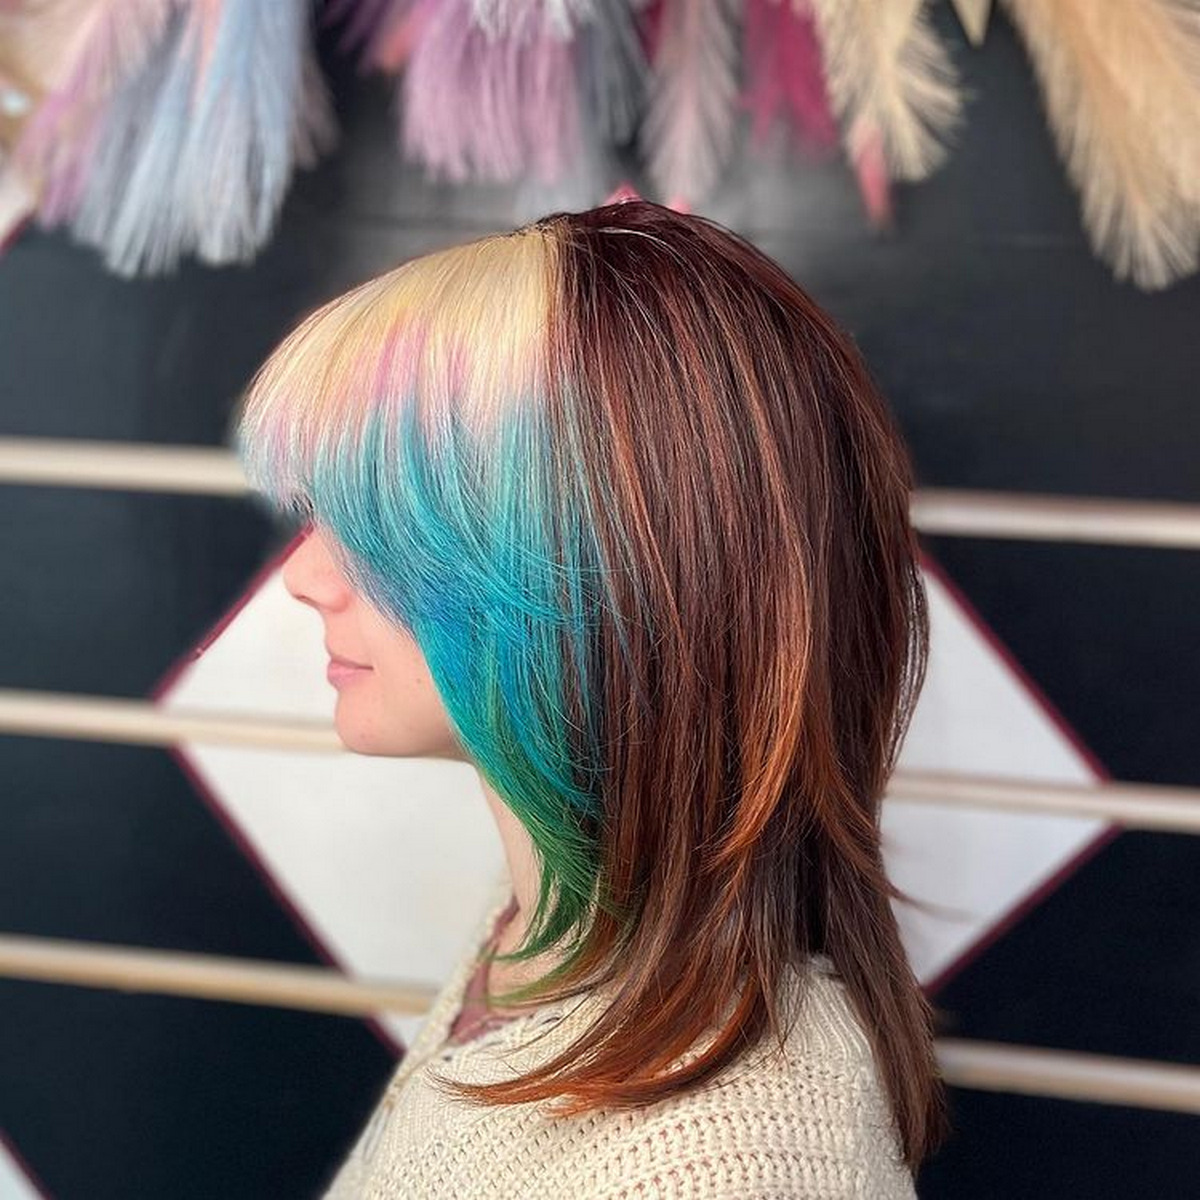 Medium-Length Copper Hair With Funky Color Bangs